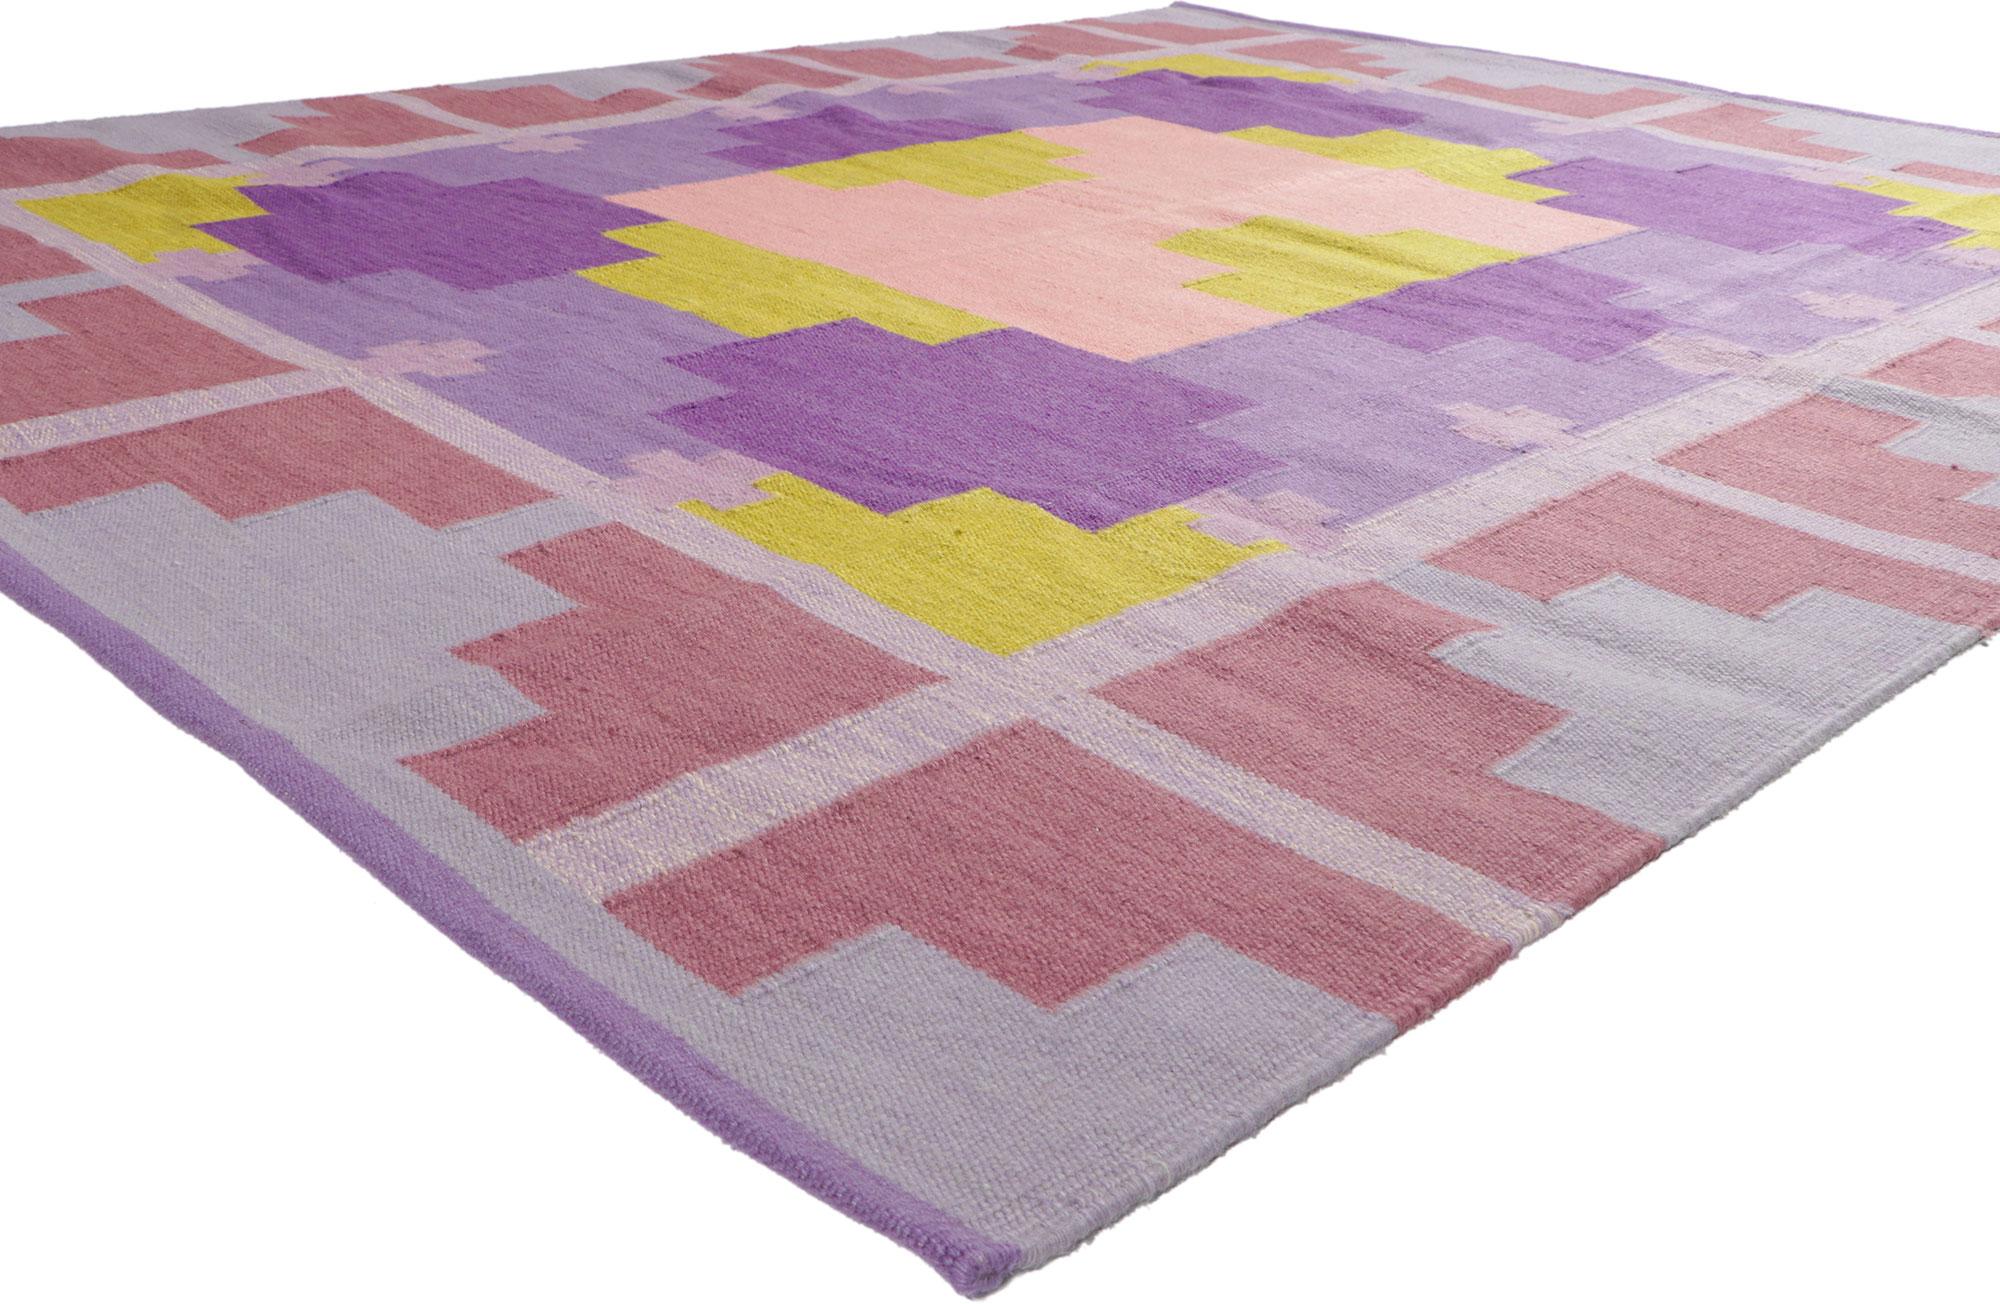 30917 New Swedish Inspired Kilim Rug, 08'02 x 10'02. 
Showcasing the bolder side of Scandinavian design, this handwoven Swedish style kilim rug is a captivating vision of woven beauty. The eye-catching geometric design and vibrant colorway woven